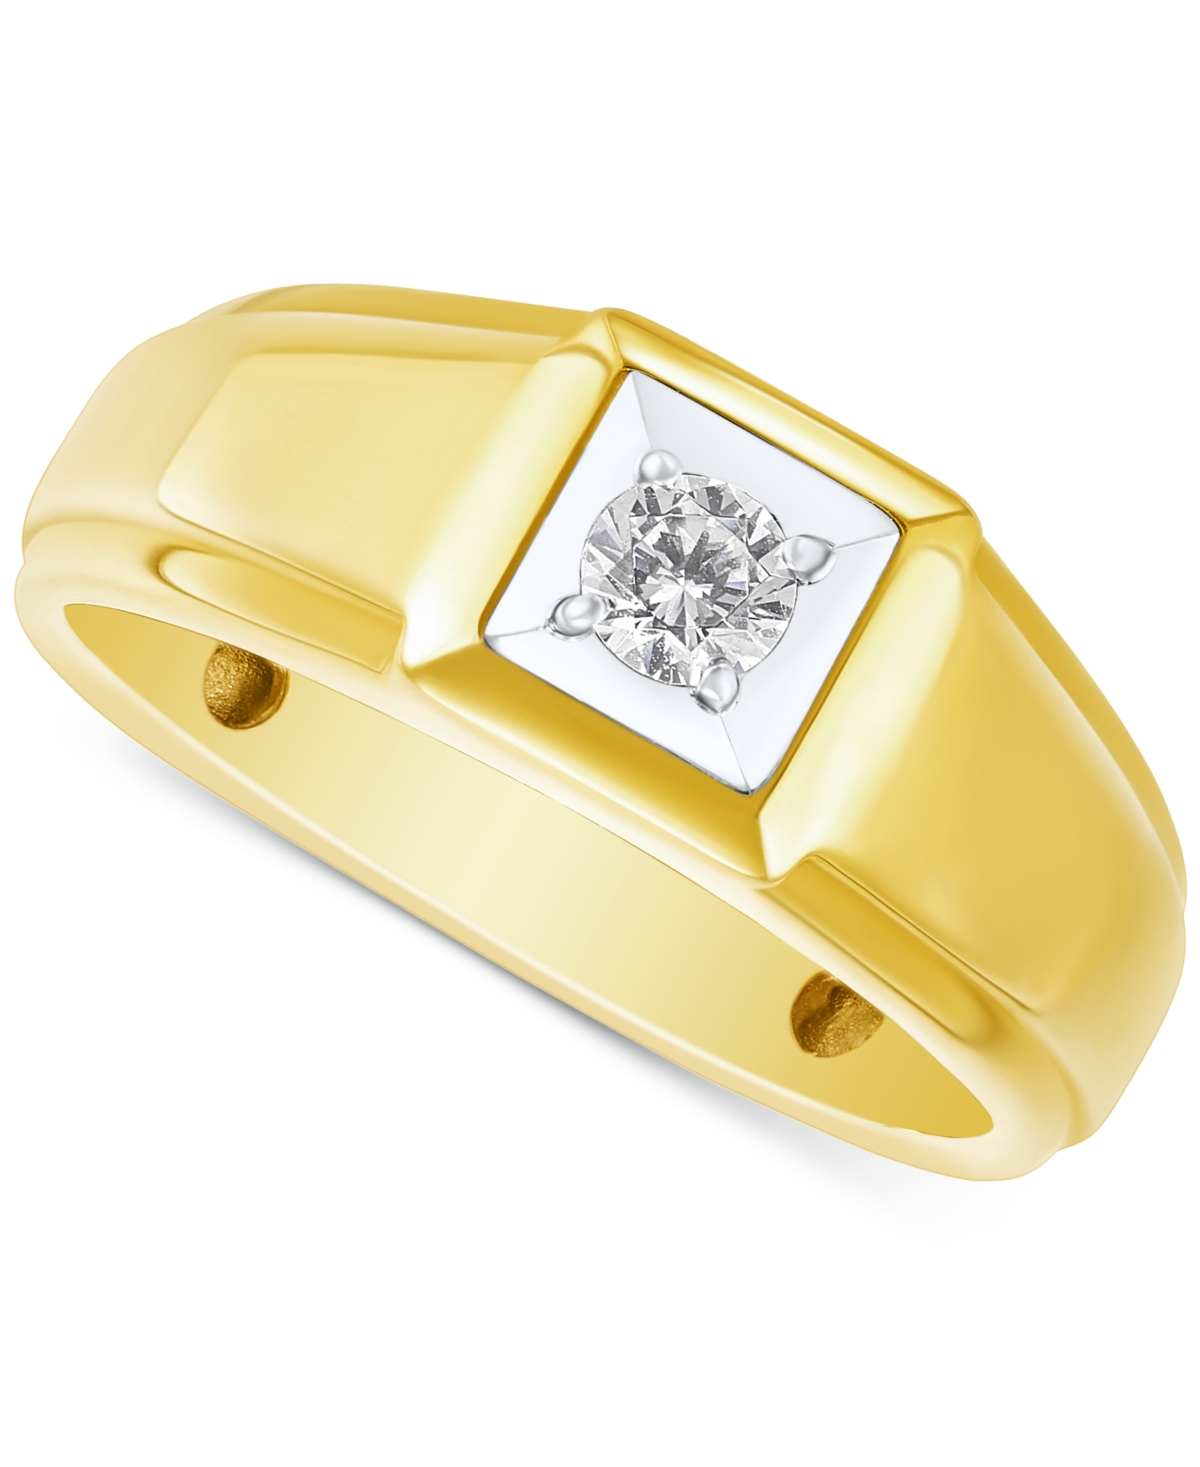 Men's Lab Grown Diamond Solitaire Ring (1/4 ct. t.w.) in 10k Gold & White Gold - Gold